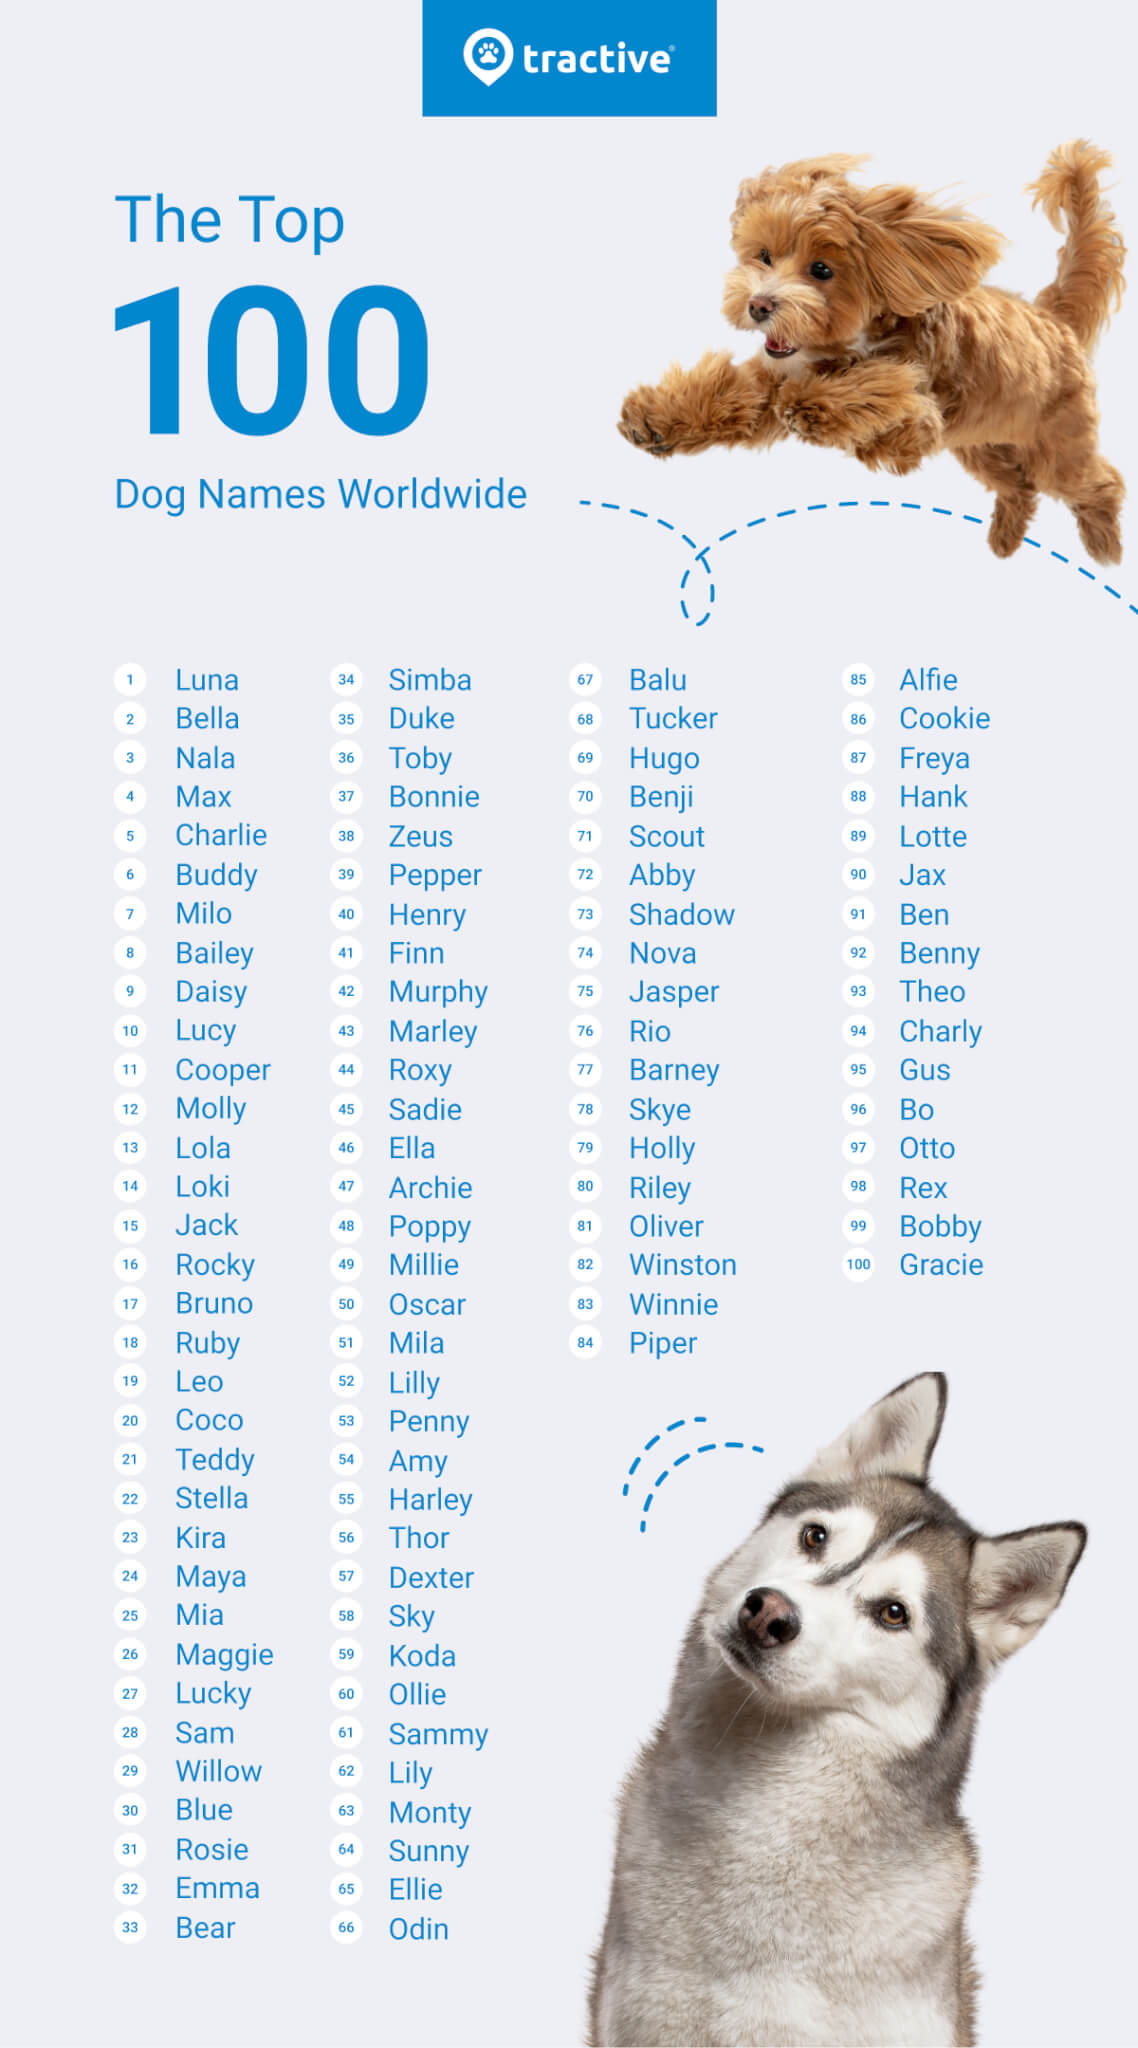 infographic list of the 100 top dog names worldwide according to Tractive 